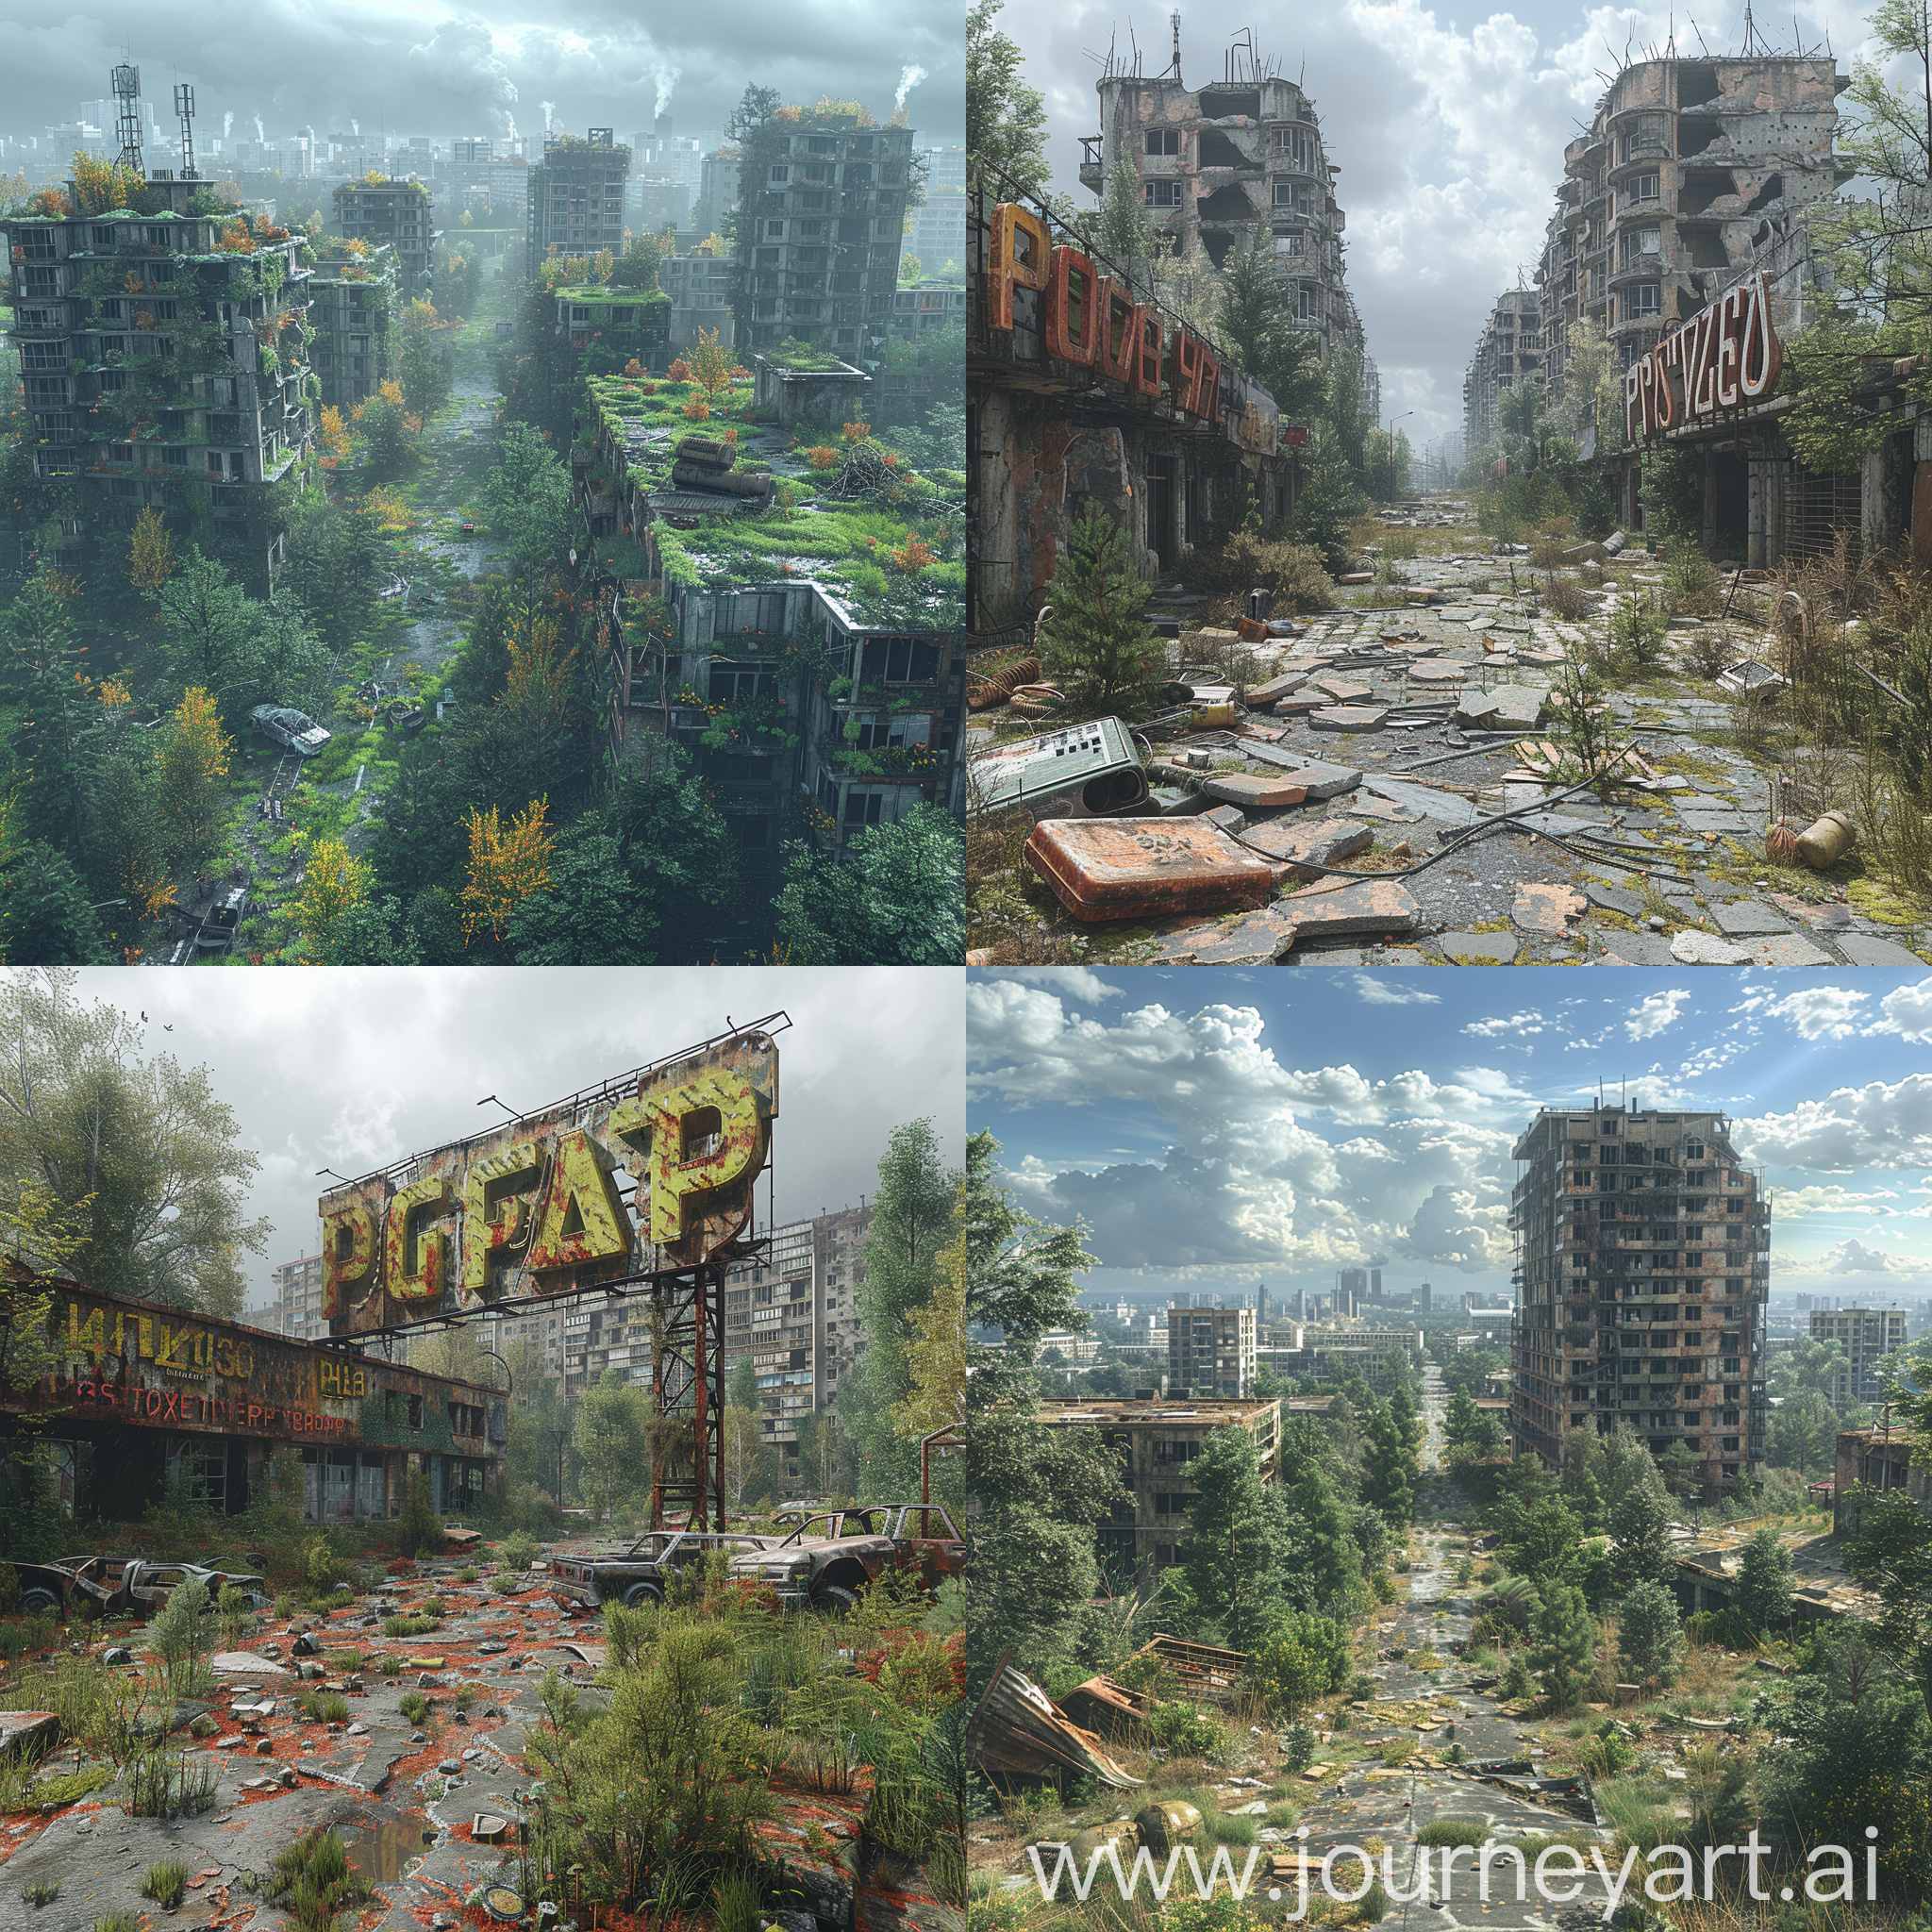 Modern, ultramodern, futuristic Pripyat, Automated Decontamination Systems, Green Infrastructure, Renewable Energy Sources, Smart Infrastructure, Advanced Transportation, Robotic Workforce, Virtual Reality Education and Training, Universal Basic Income, Advanced Telemedicine, Mental Health and Wellbeing Programs, Direct Democracy, Vertical Farming, Advanced Recycling and Waste Management, Lab-grown Meat, Universal Basic Education, Advanced Virtual Reality Entertainment, Advanced Prosthetic Technology, Advanced Crime Prediction and Prevention, Disaster Mitigation Systems, Universal Basic Security, octane render --stylize 1000